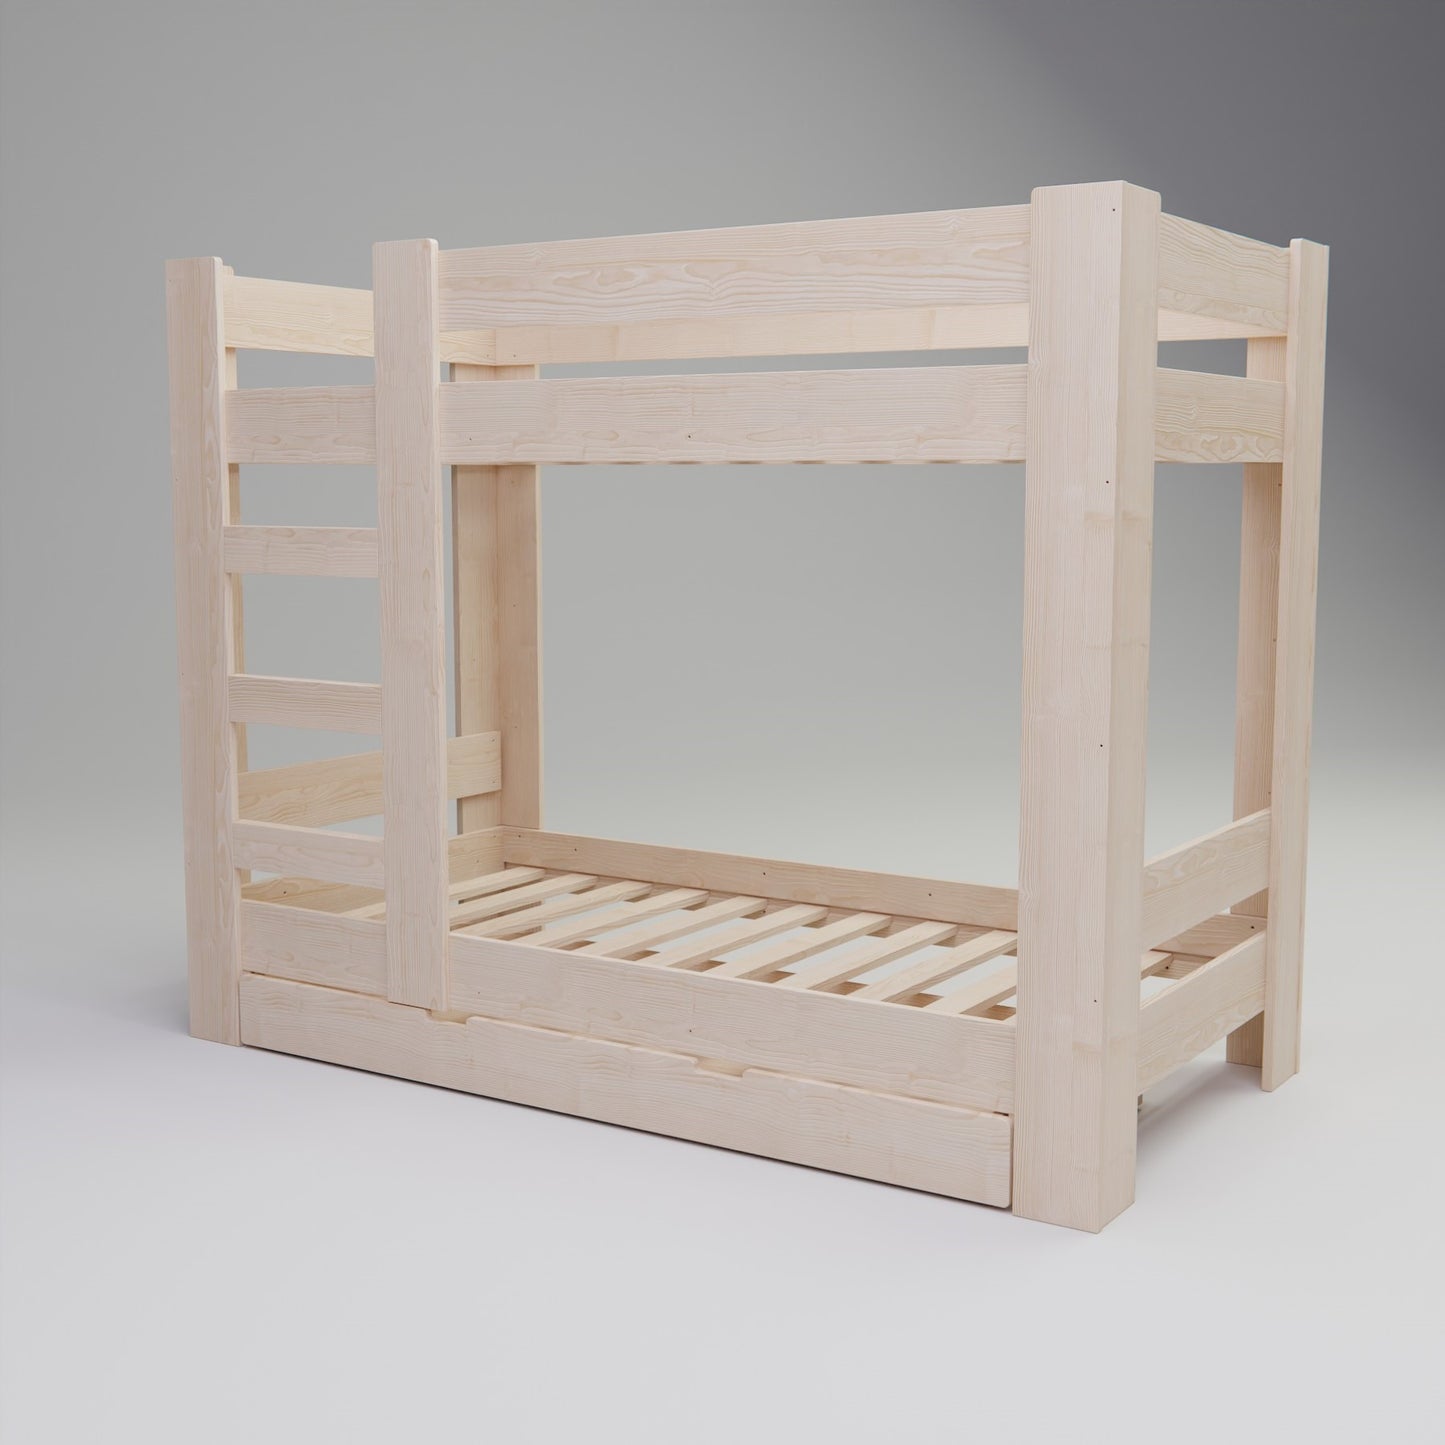 Maximise your room space with our adaptable bunk bed. Featuring flexible ladder positioning, optional drawer, and solid NZ Pine construction.